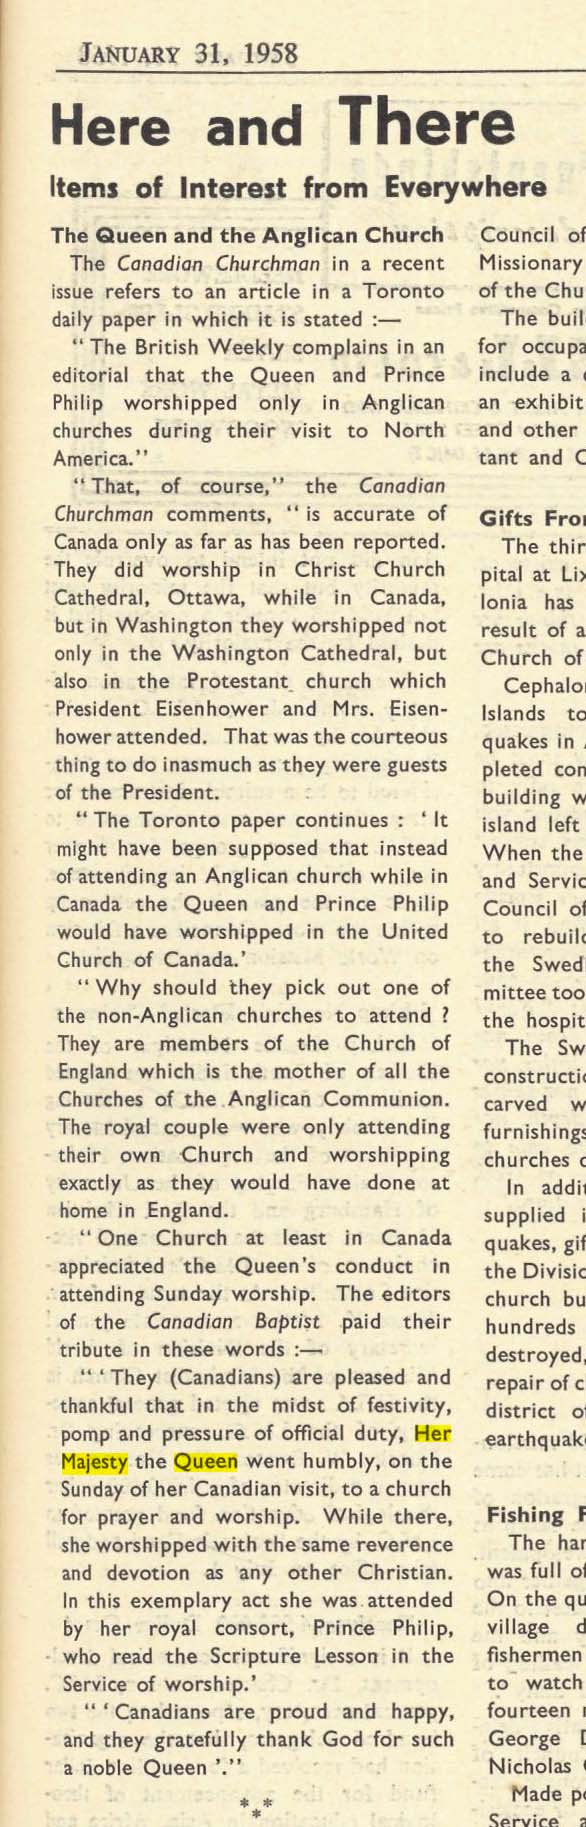 Gazette coverage of the Queen in Canada.